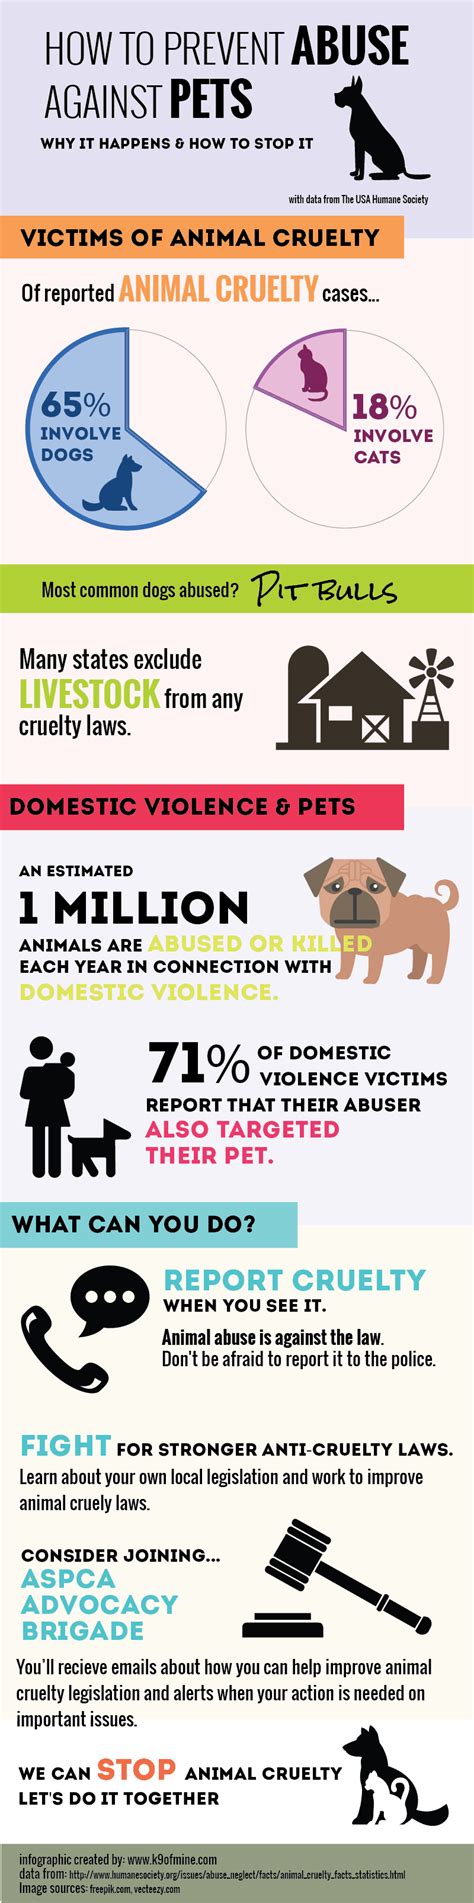 What is the most common dog abuse?